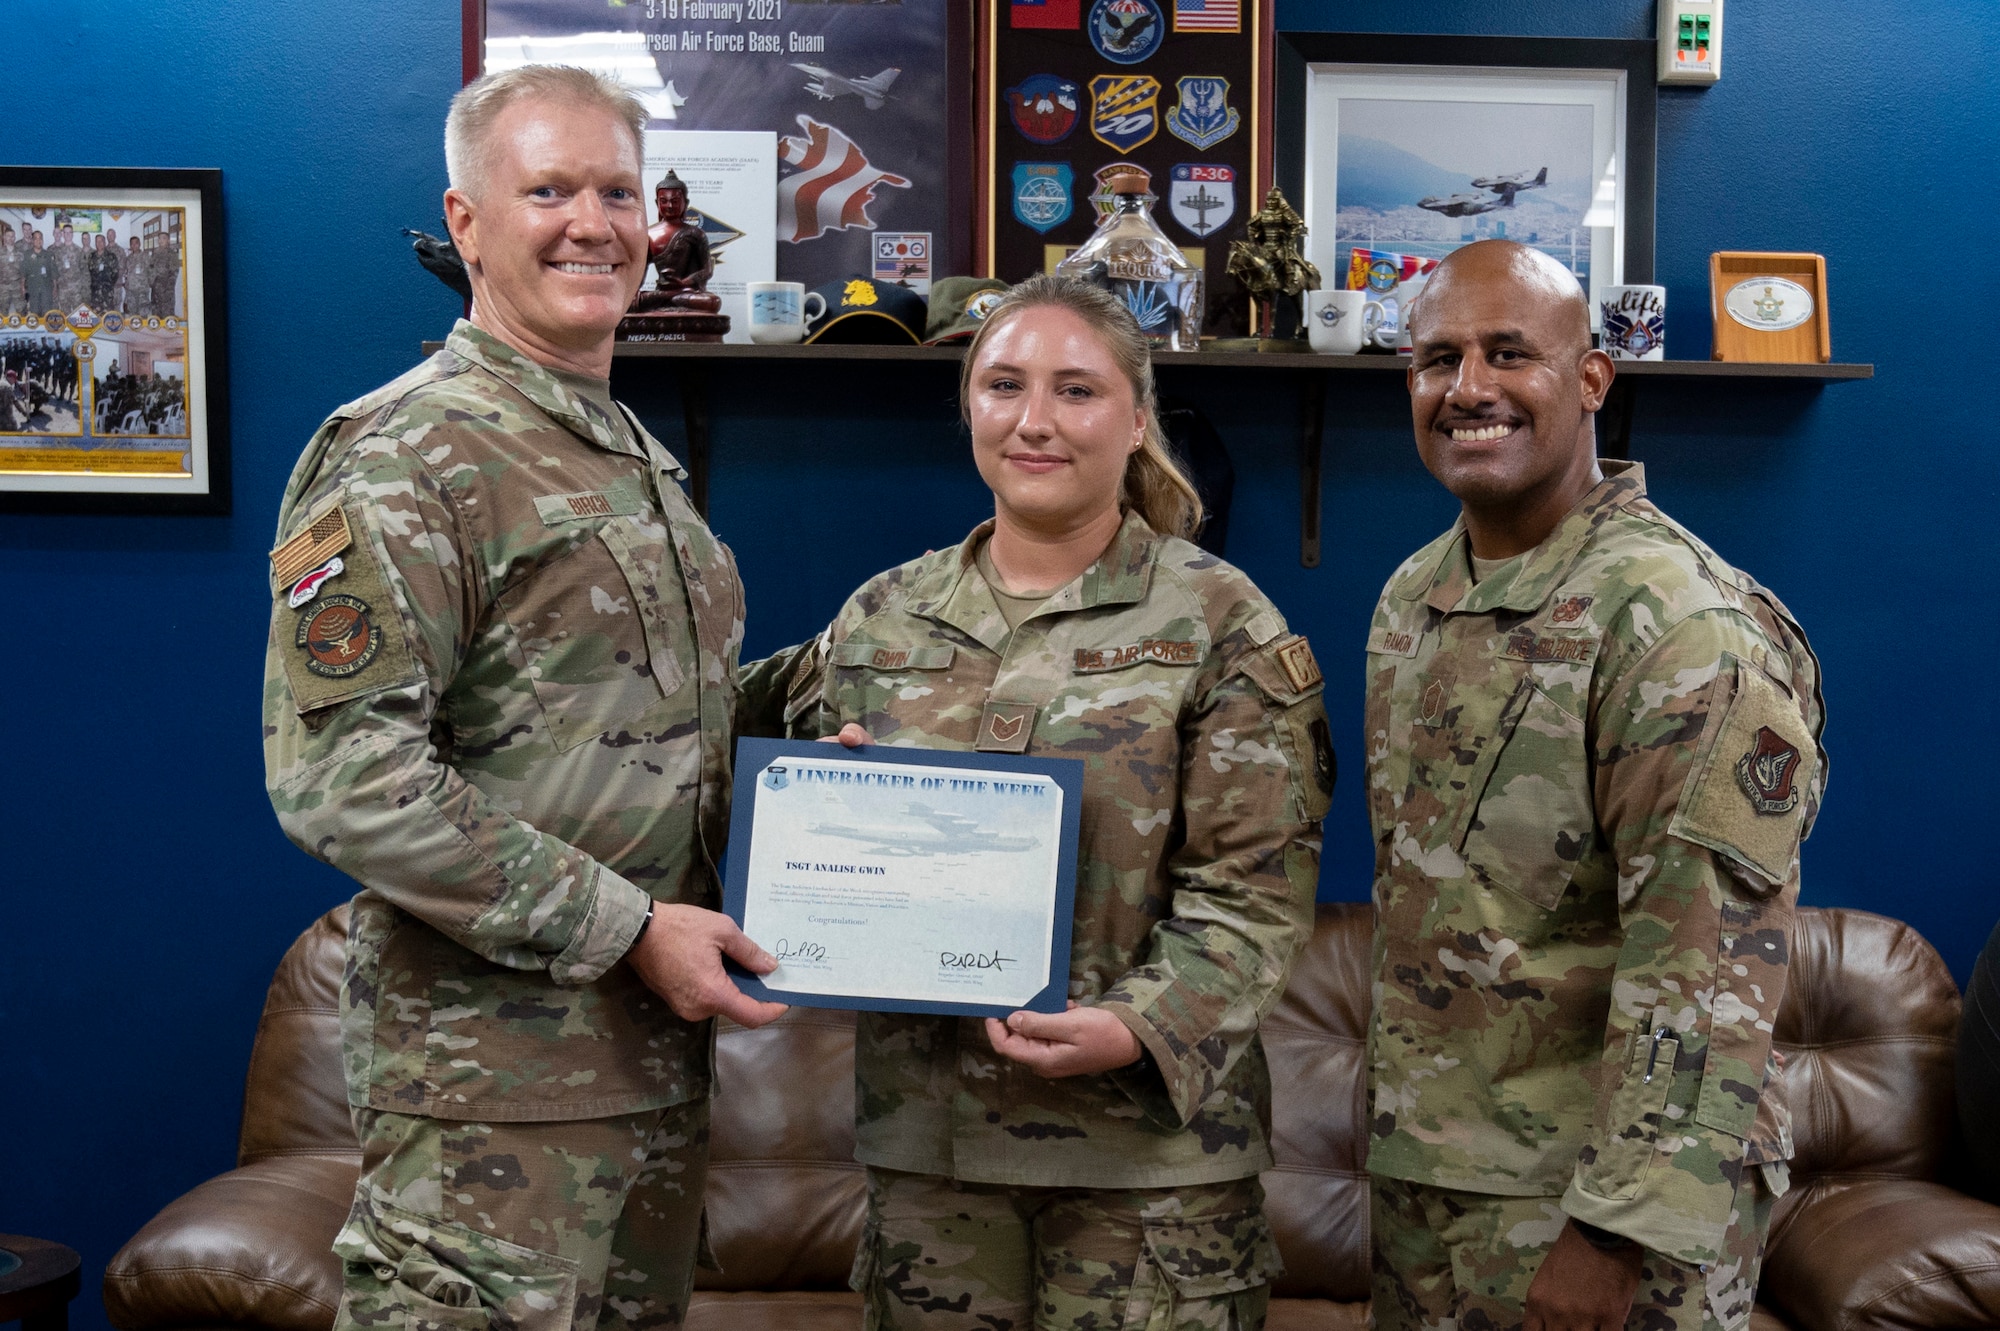 U.S. Air Force Tech. Sgt. Analise Gwin, the noncommissioned officer in charge of the commander’s support staff assigned to the 36th Contingency Response Support Squadron, receives the Linebacker of the Week Award from U.S. Air Force Brig. Gen Paul Birch, the 36th Wing commander, and U.S. Air Force Chief Master Sgt. Jose Ramon, the senior enlisted leader of the 36th Maintenance Group, at Andersen Air Force Base, Guam, Dec. 2, 2022. The Team Andersen Linebacker of the Week recognizes outstanding enlisted, officer, civilian and total force personnel who have had an impact on achieving Team Andersen’s mission, vision and priorities. (U.S. Air Force photo by Airman 1st Class Emily Saxton)